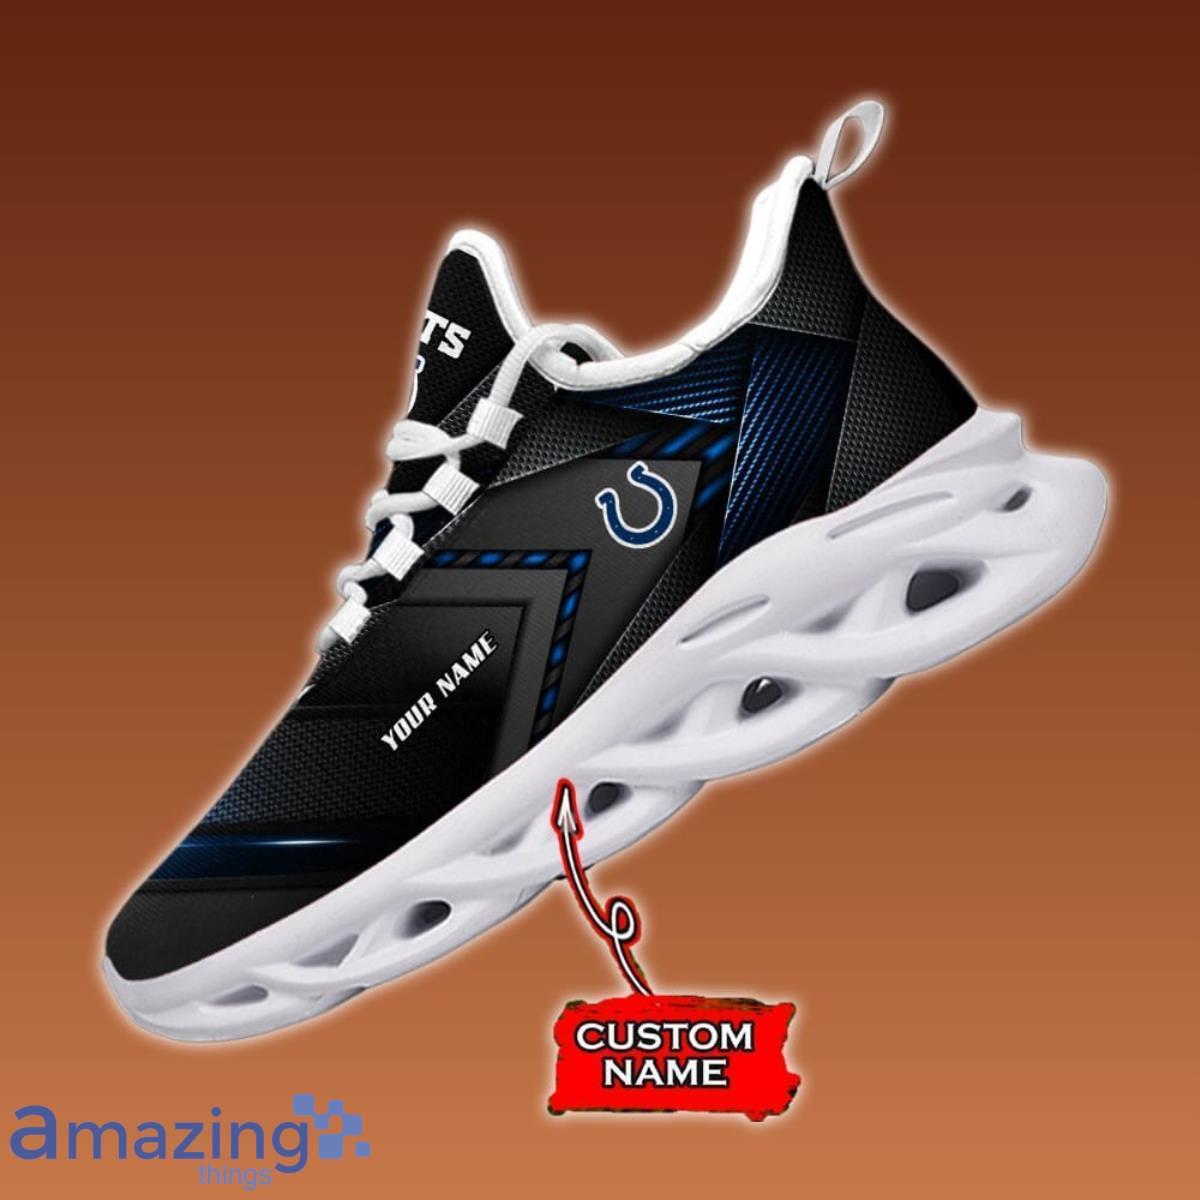 Custom Name Indianapolis Colts Max Soul Shoes Impressive Gift For Men Women Product Photo 1